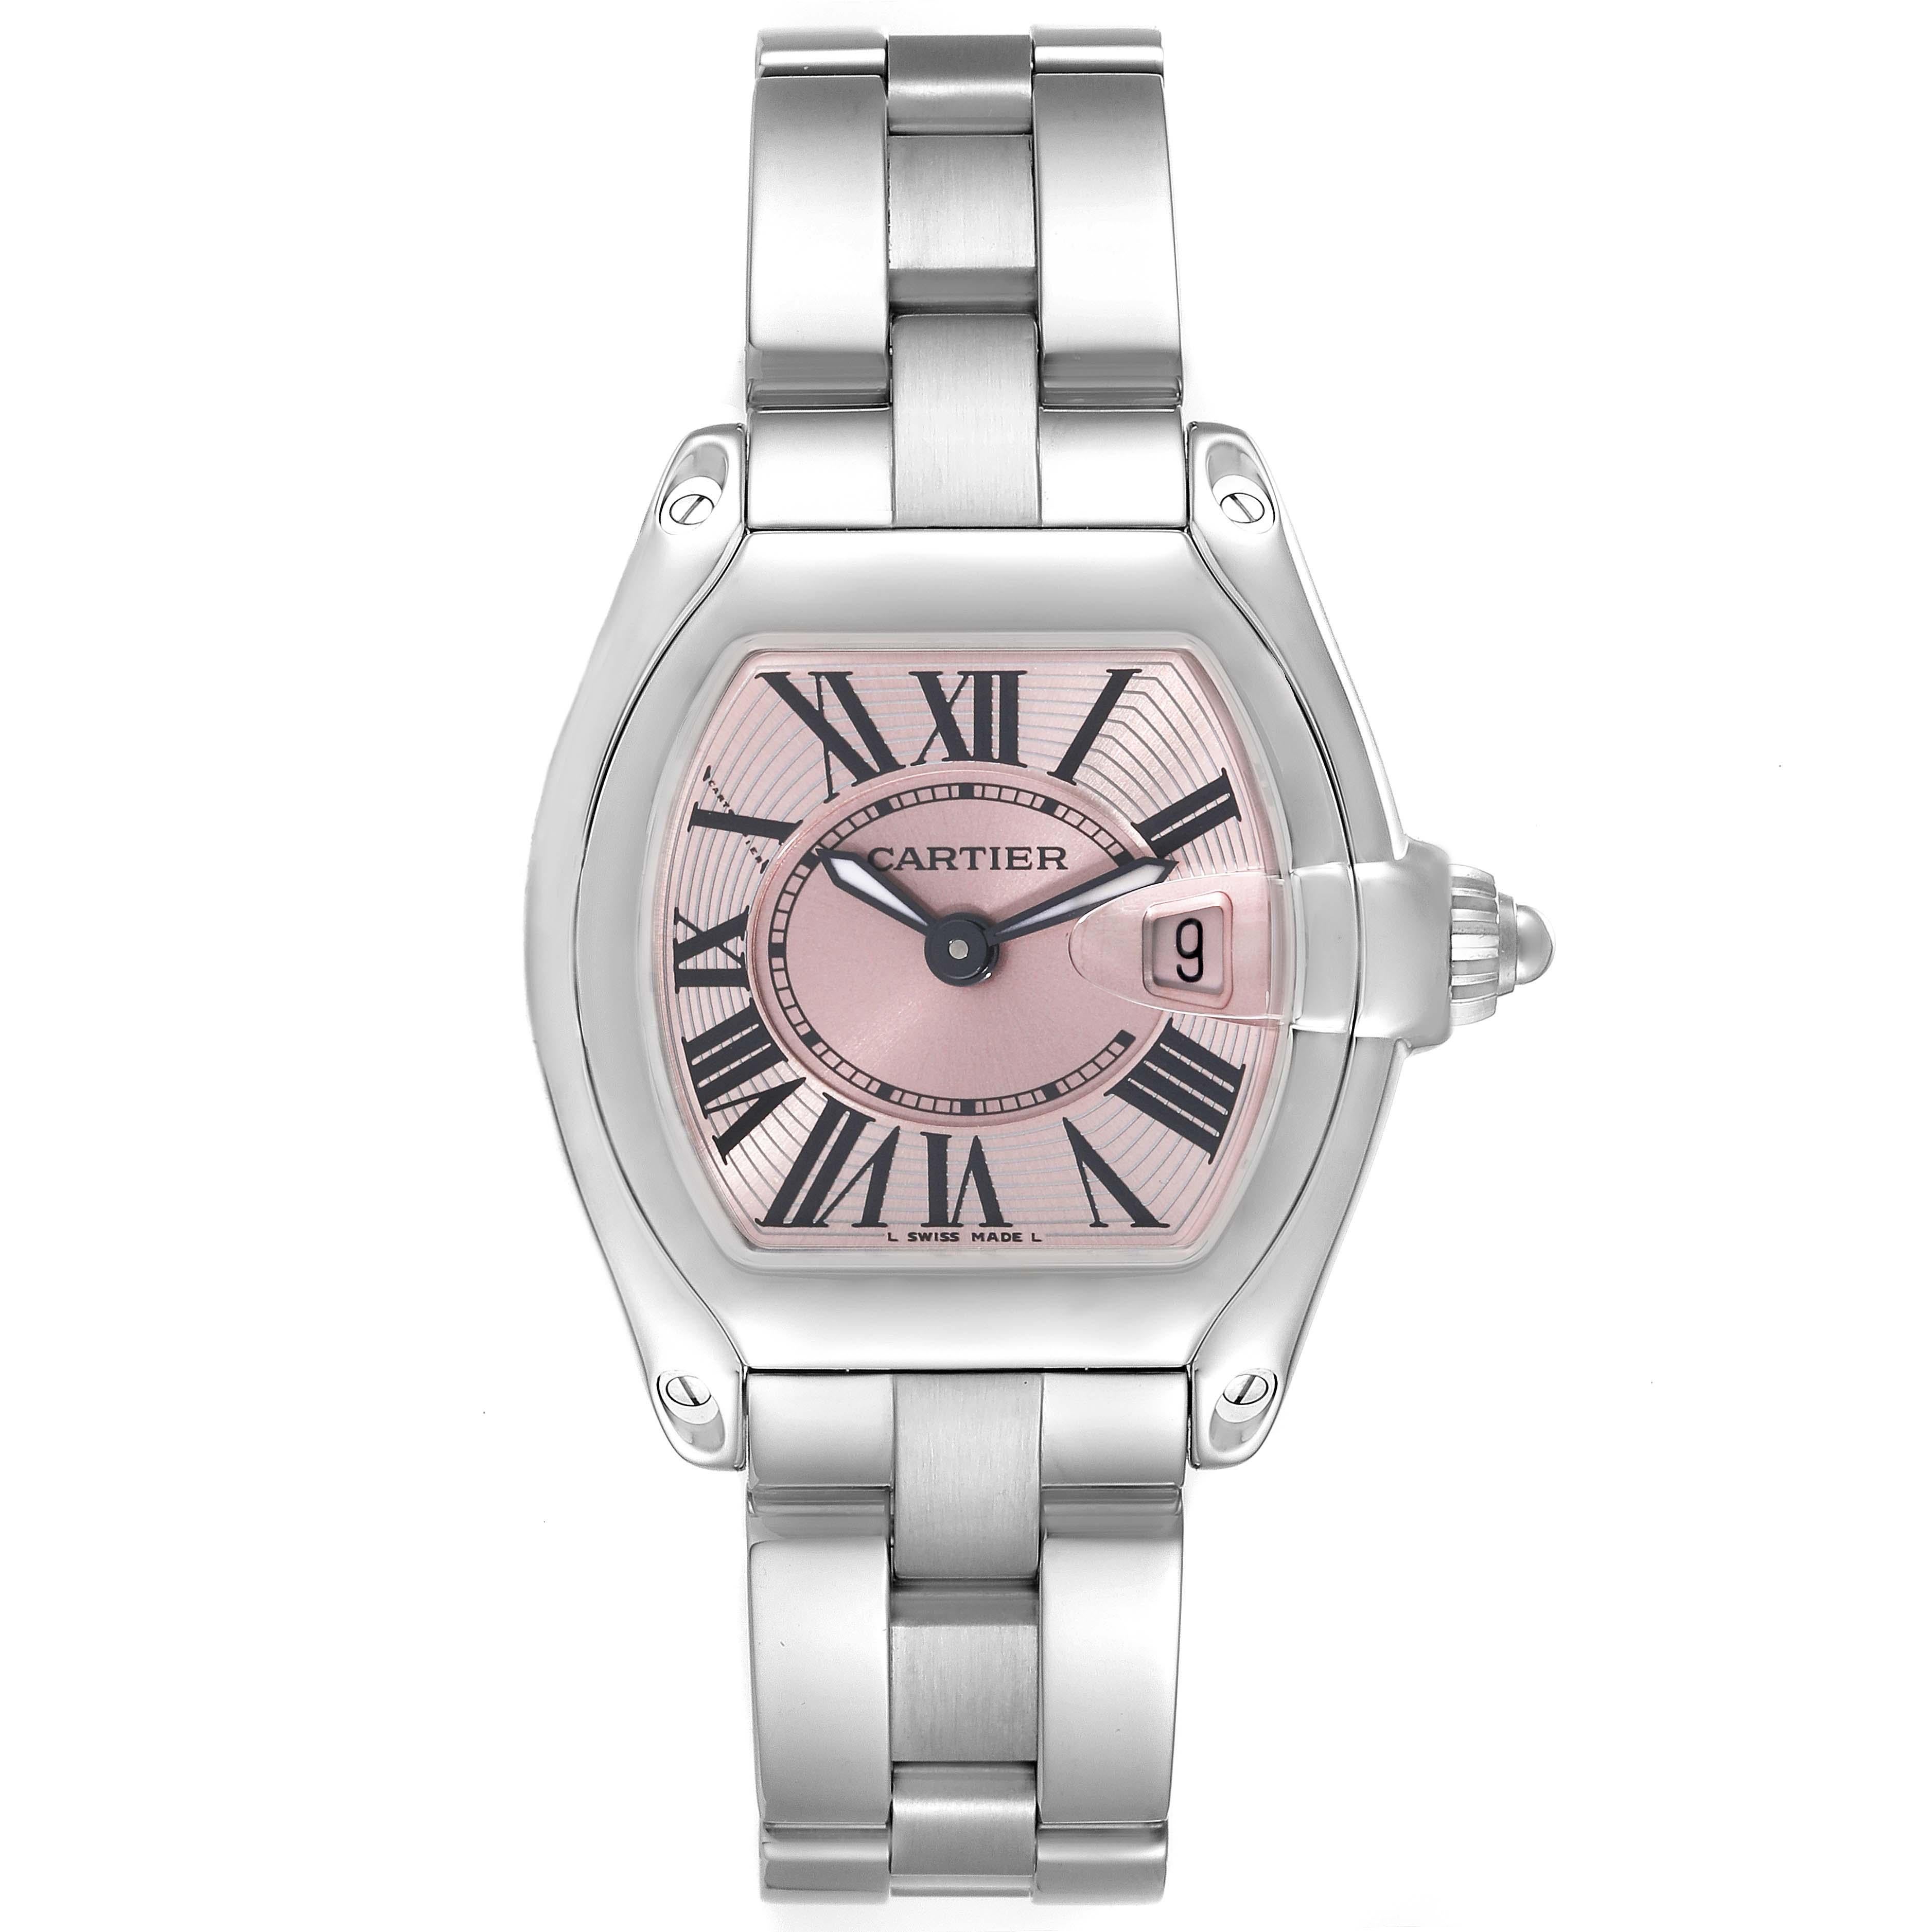 Cartier Roadster Small Pink Dial Steel Ladies Watch W62017V3. Swiss quartz movement calibre 688. Stainless steel tonneau shaped case 36 x 30 mm. . Scratch resistant sapphire crystal with cyclops magnifier. Pink sunray effect dial with black Roman